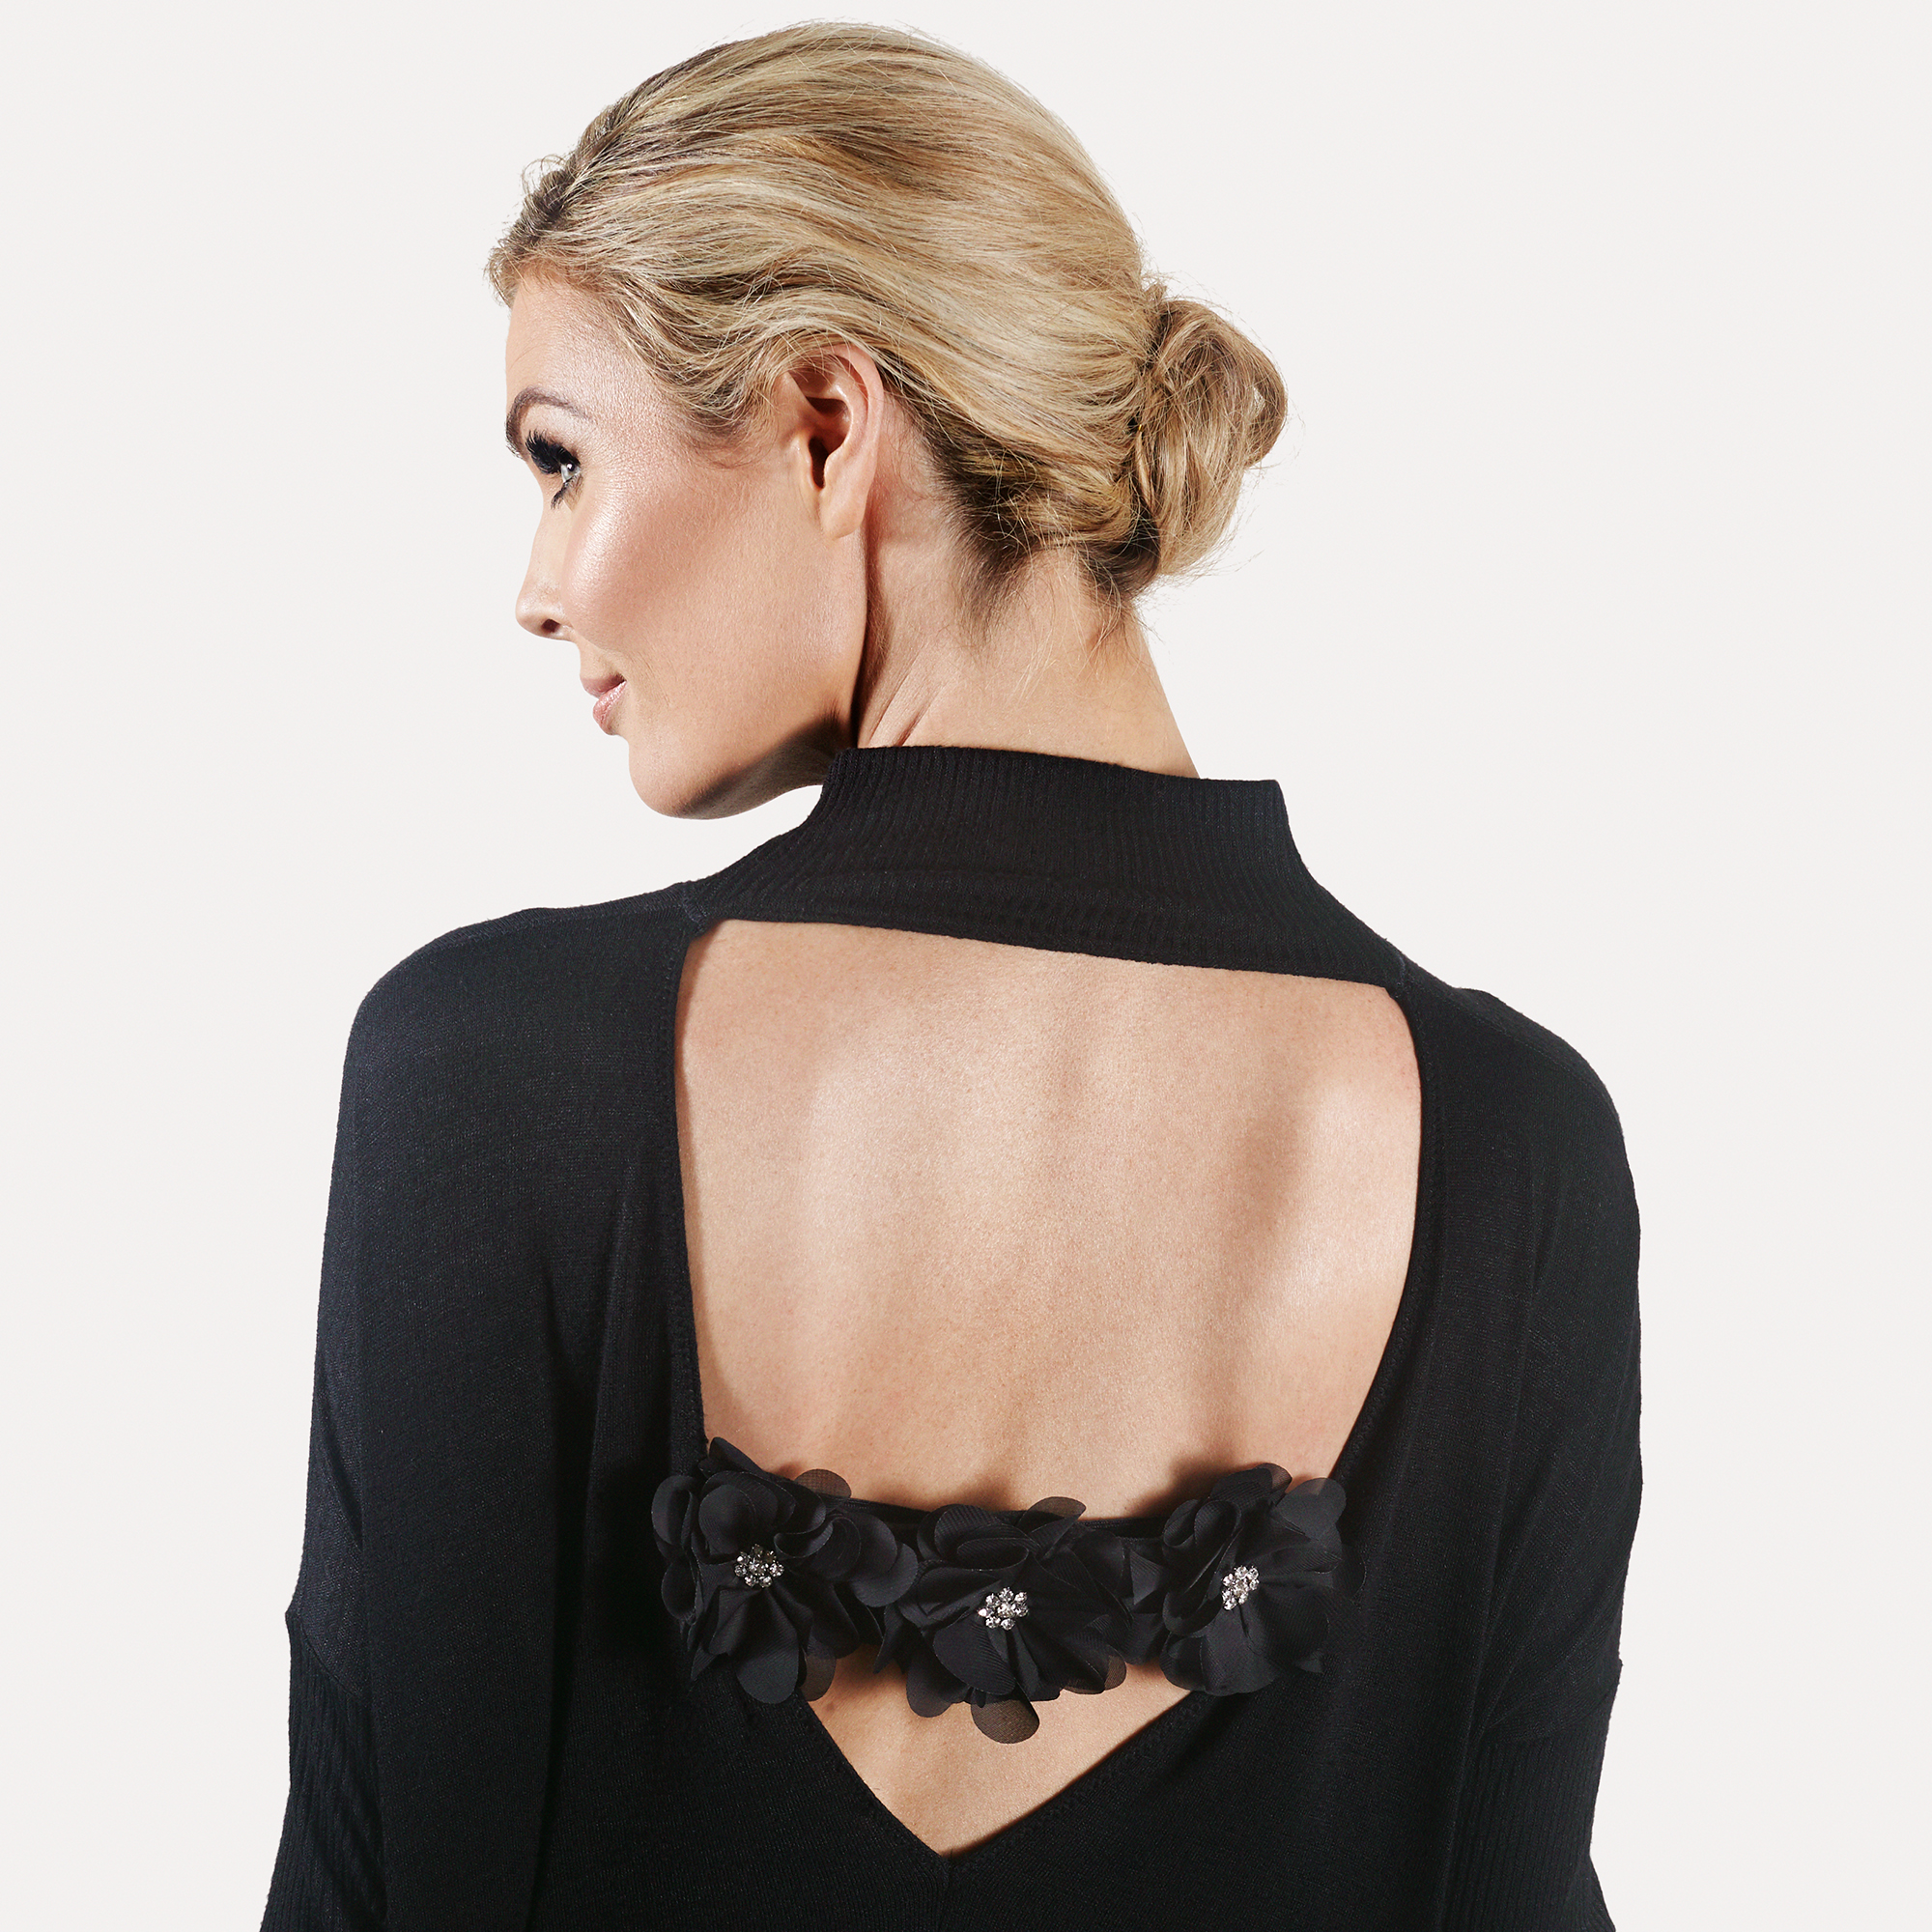 model with black sweater and organza flowers.jpg